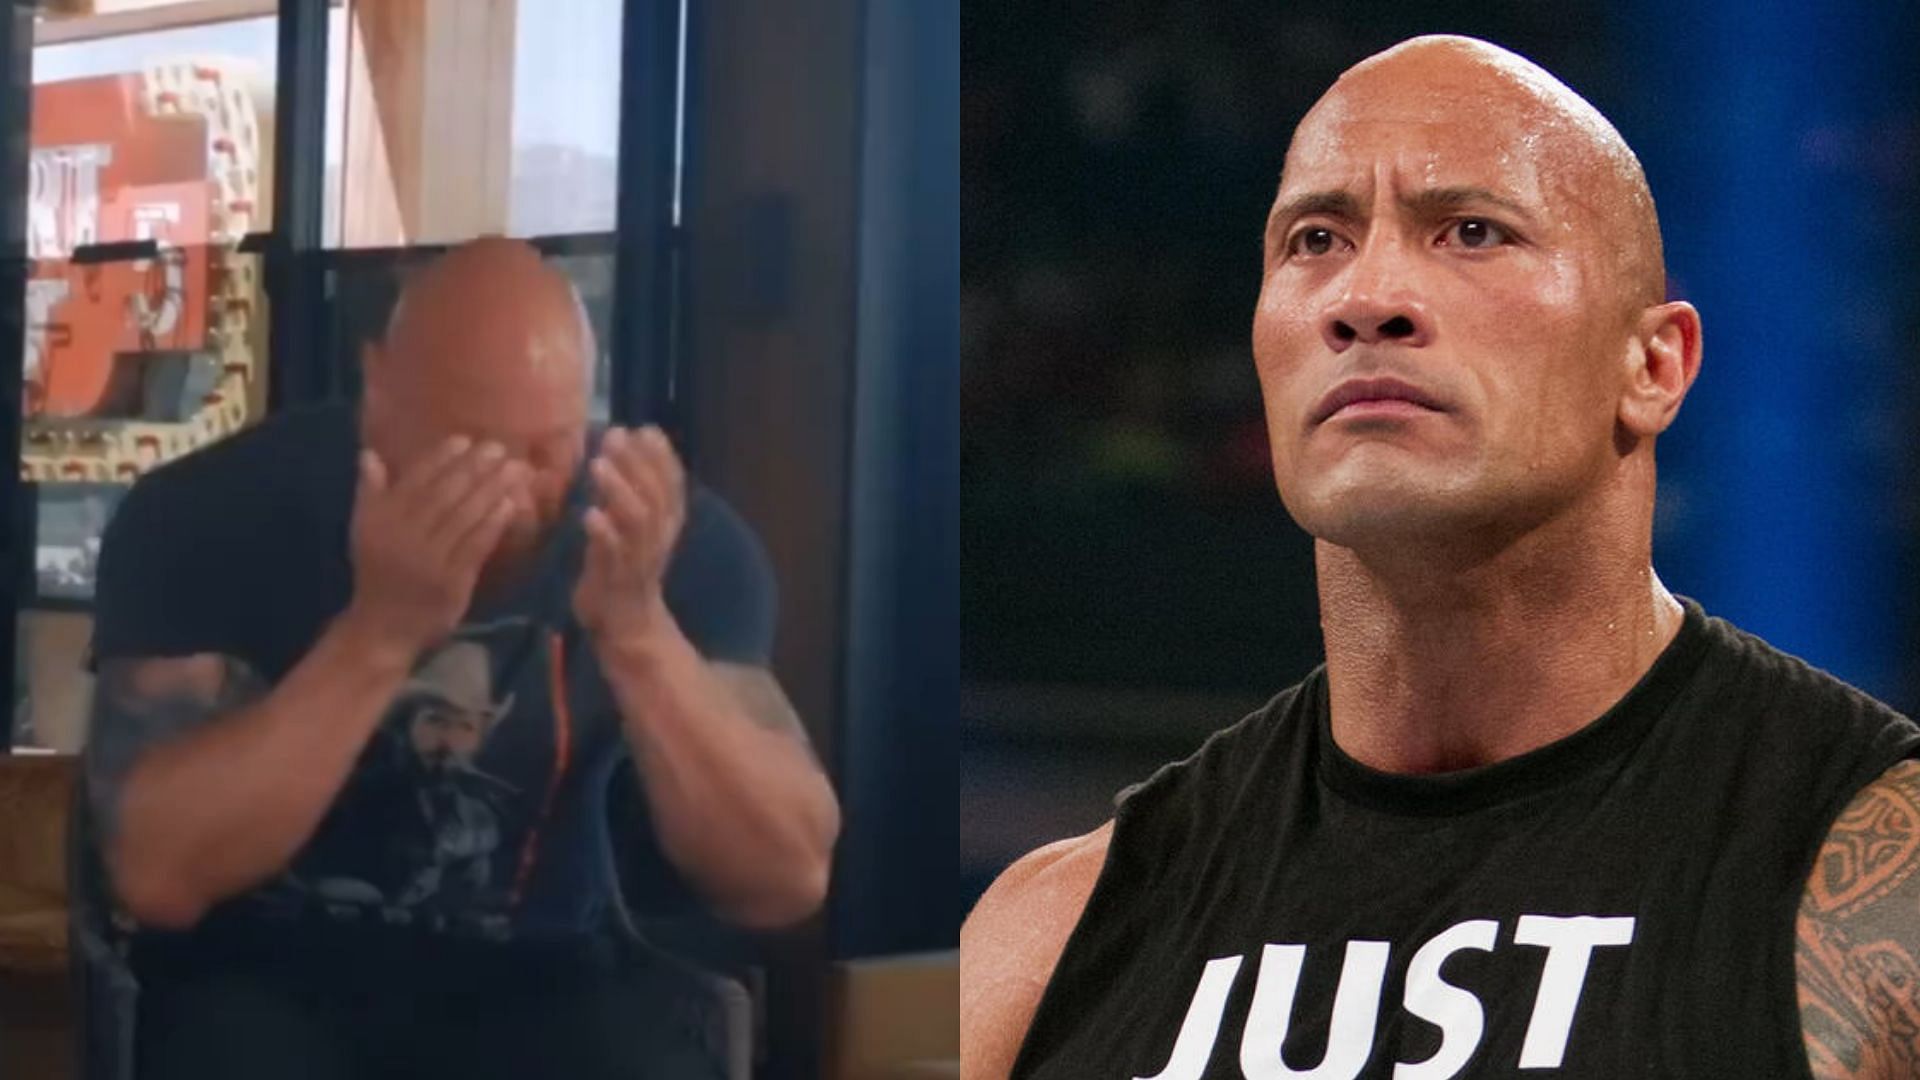 The Rock confessed that he was not expecting it